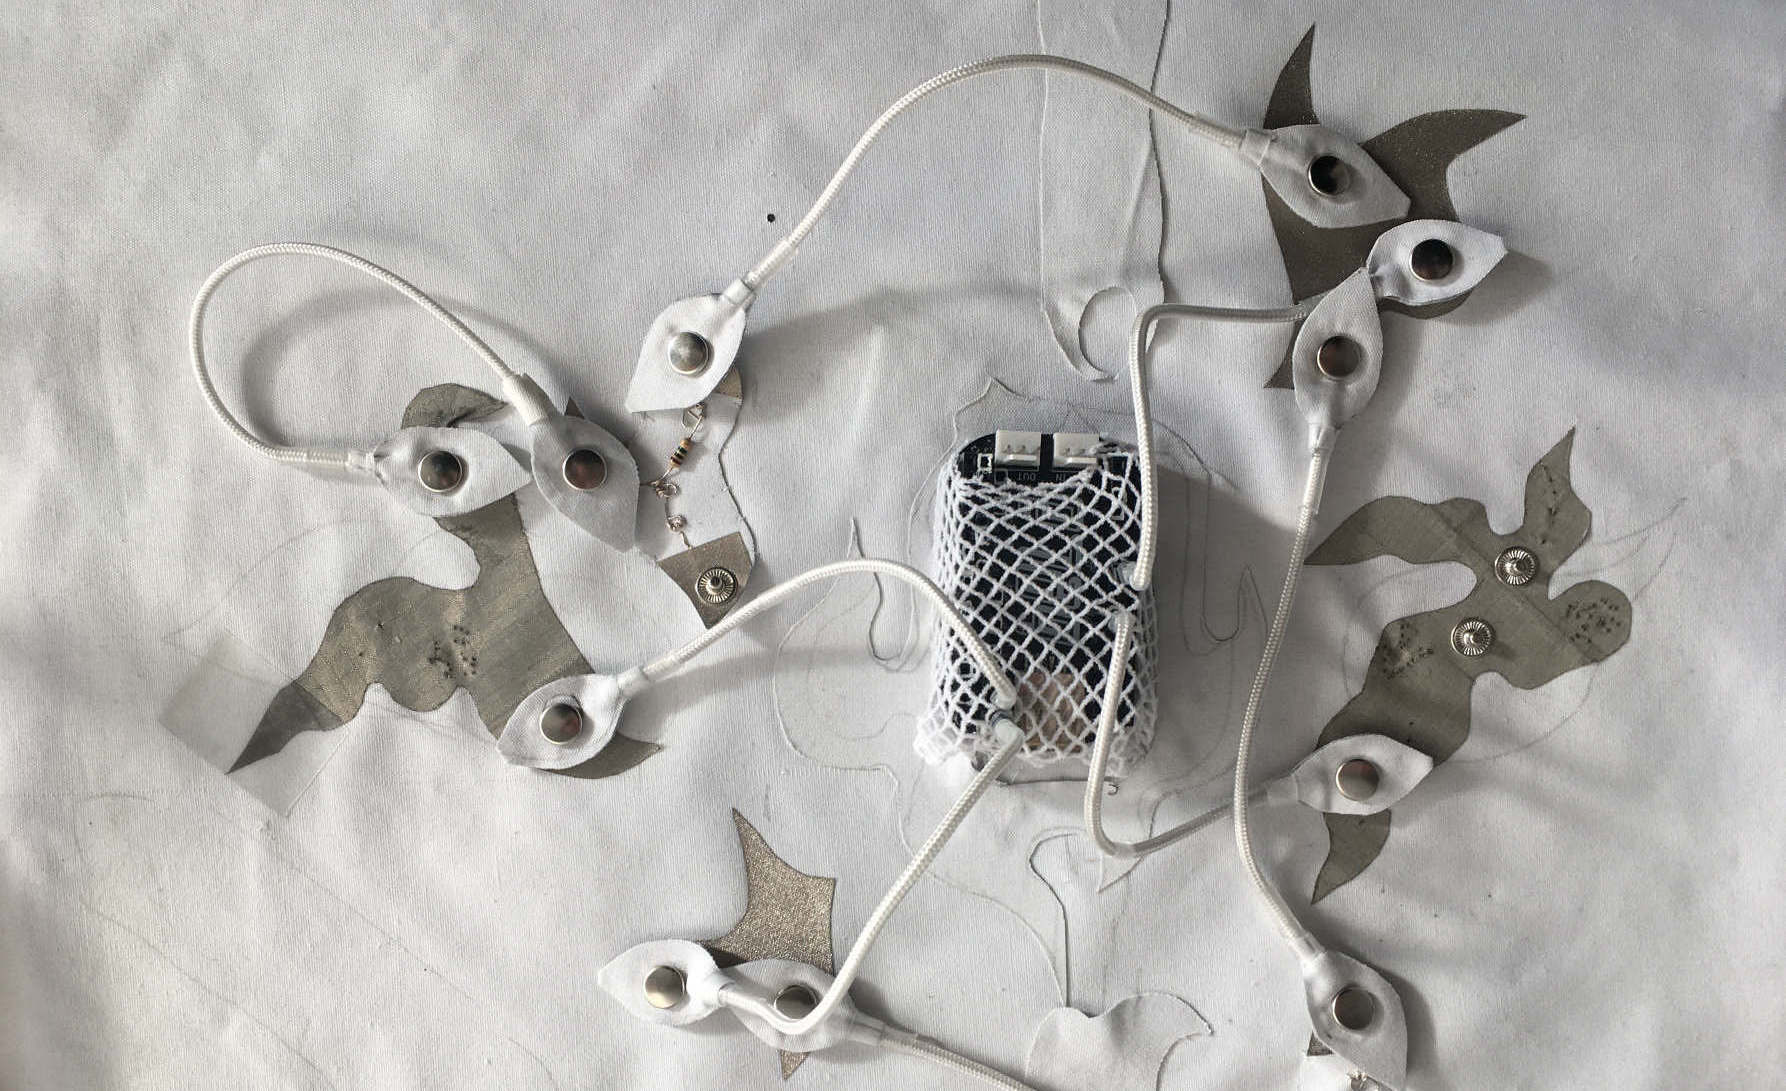 Making music with e-textiles